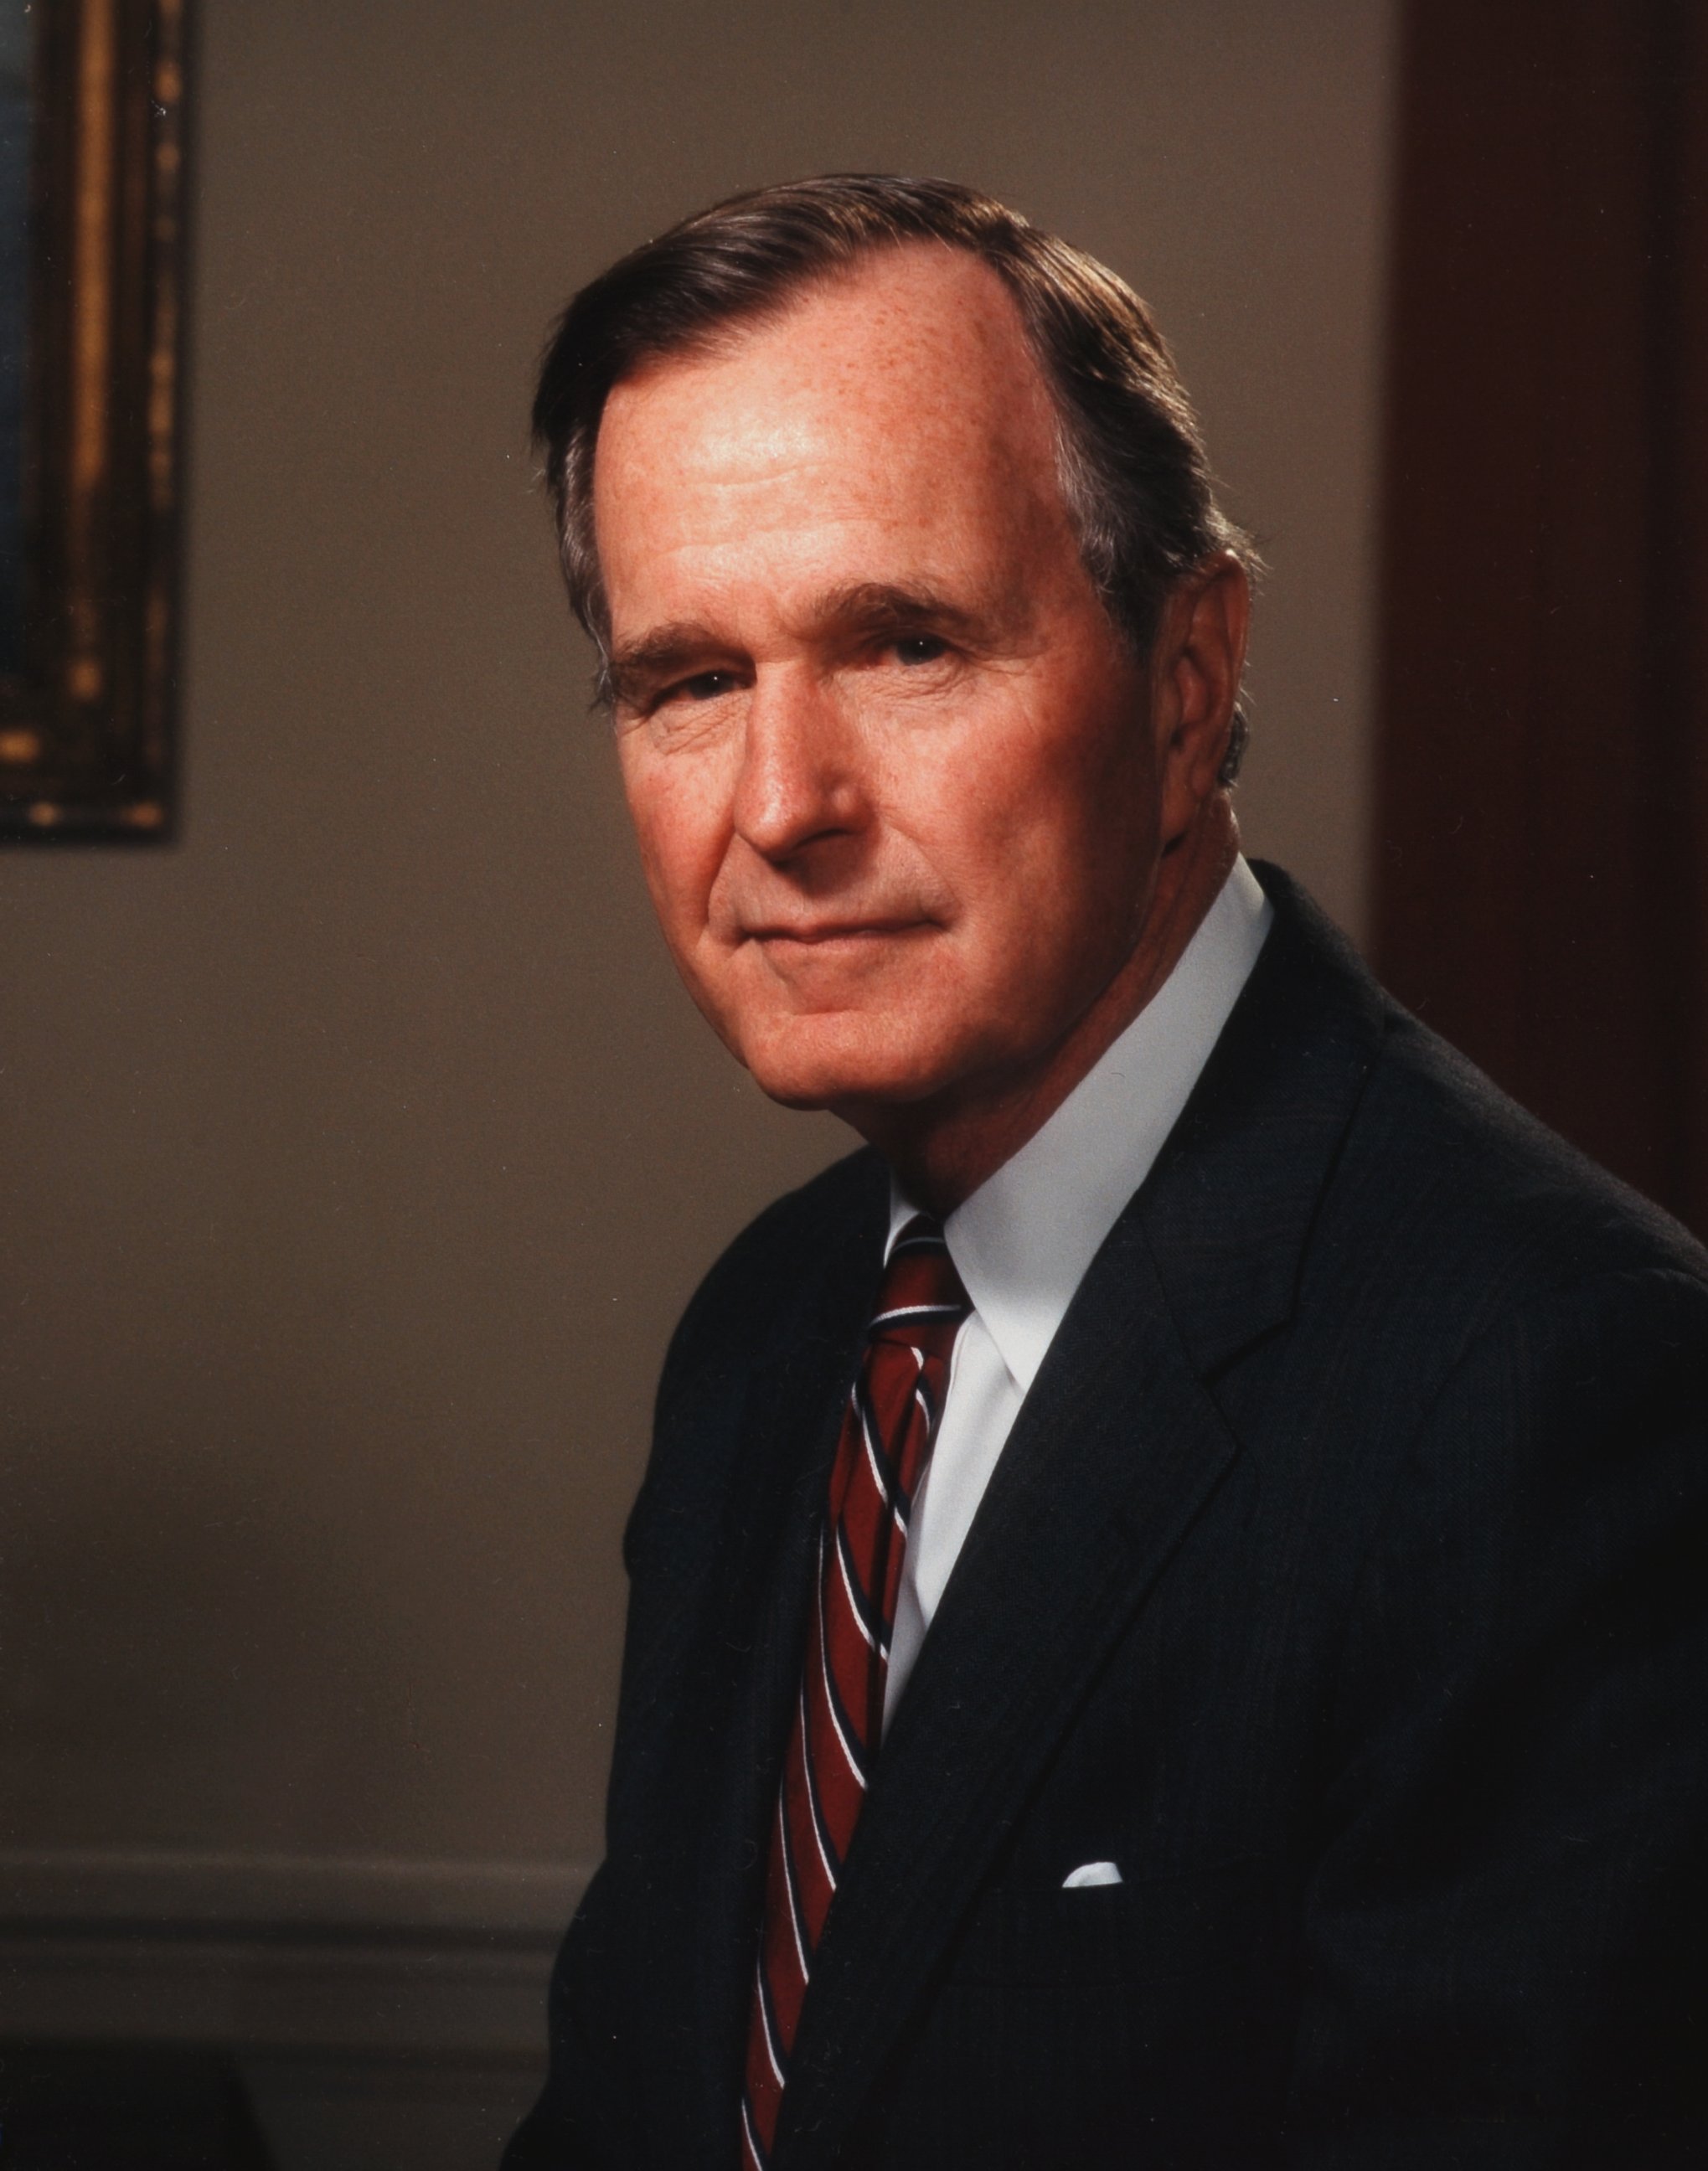 PHOTO: A portrait of American politician George Herbert Walker Bush, the 41st President of the United States, in the Oval Office, Washington, D.C., 1991.